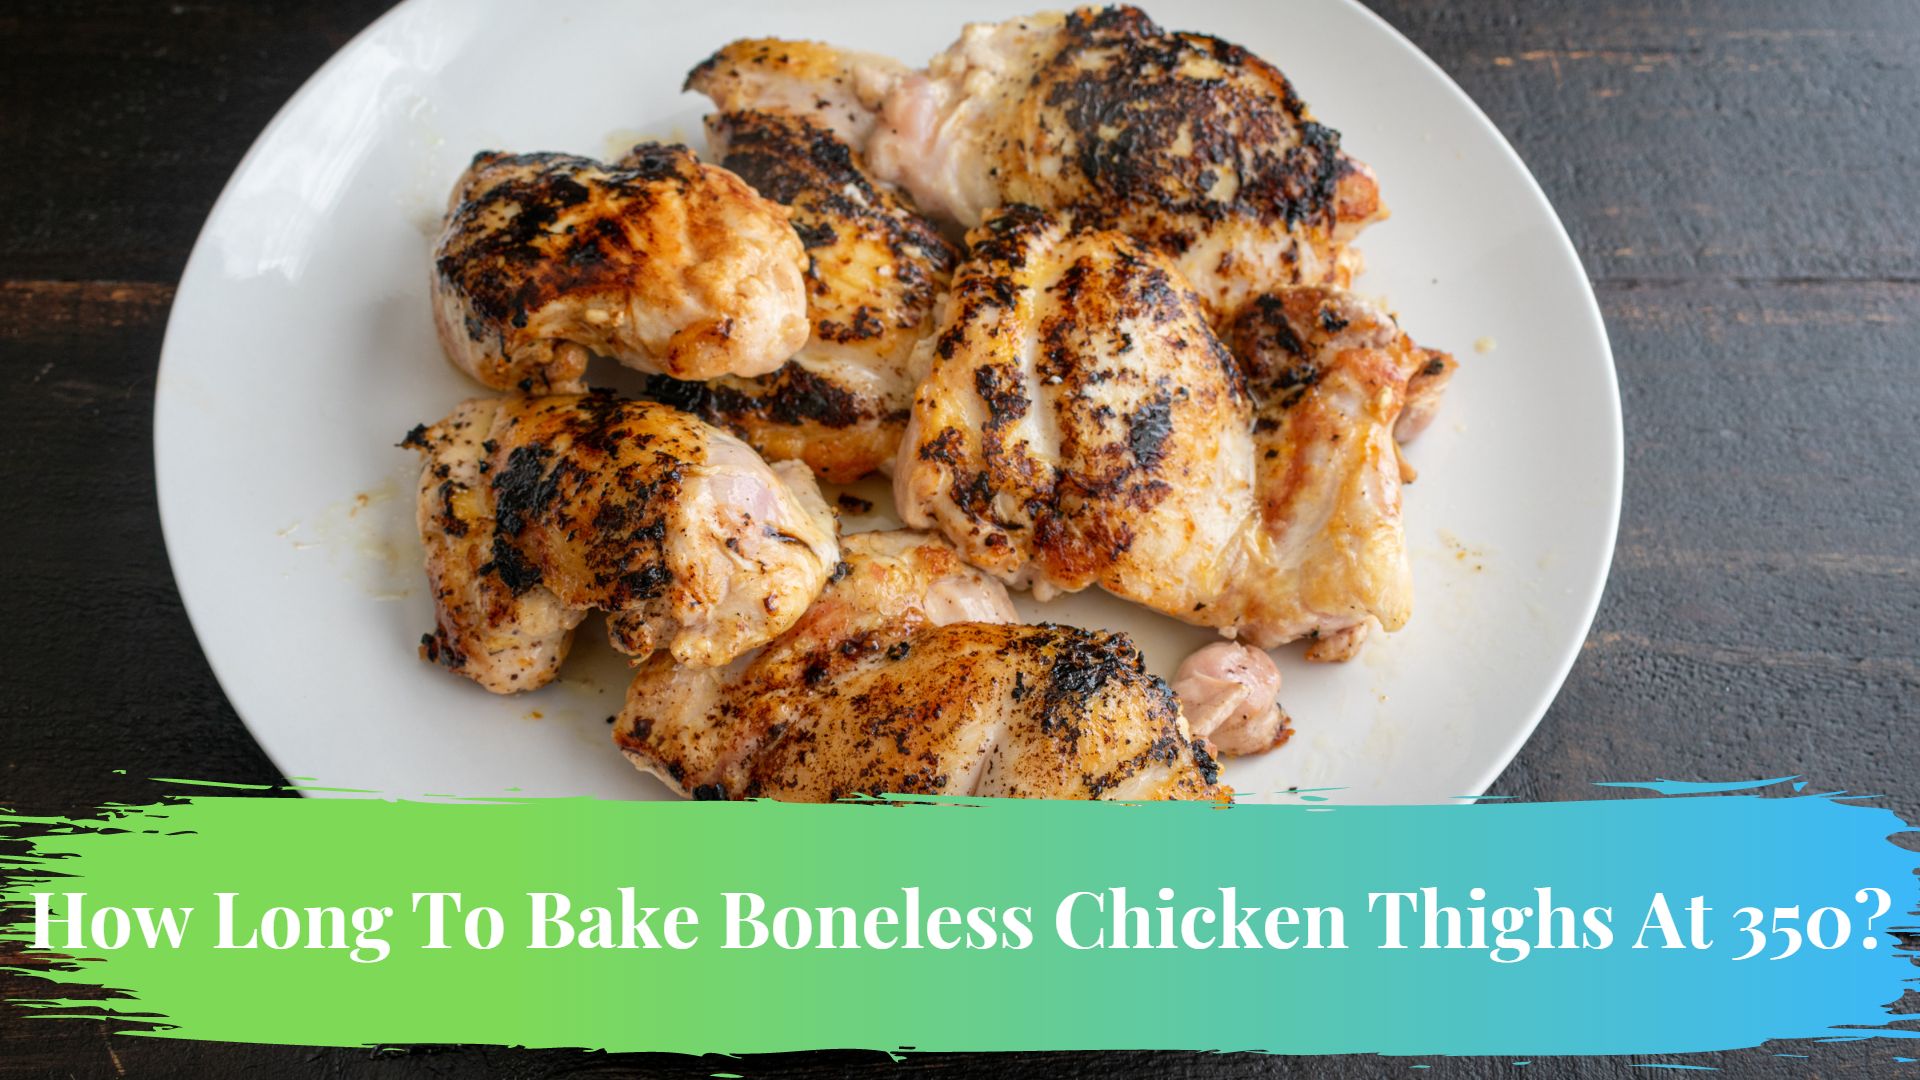 How Long To Bake Boneless Chicken Thighs At 350